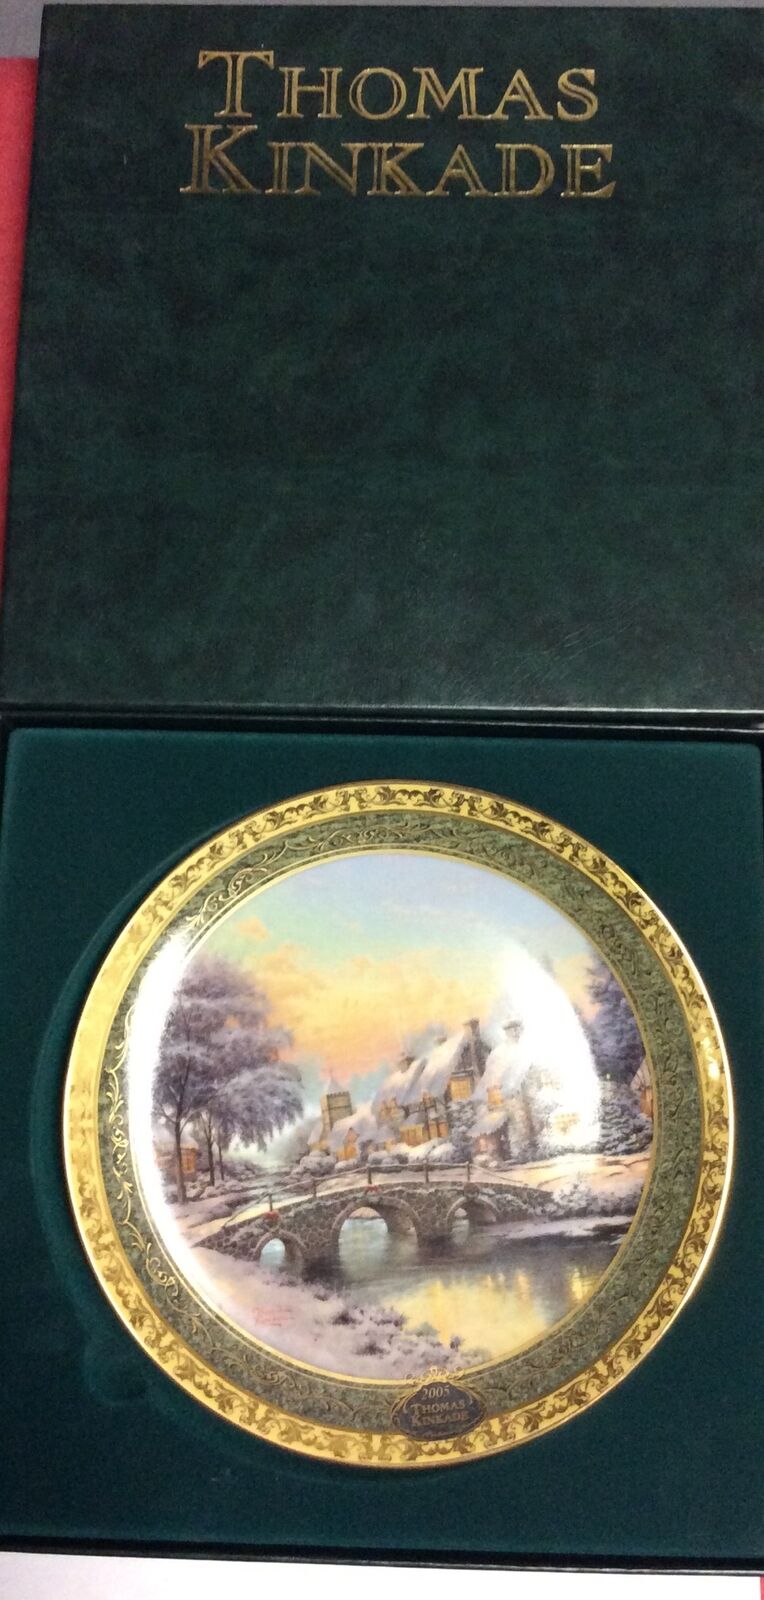 2005 Thomas Kinkade #4657A In The Limited Edition Of Gobblestone Christmas W Box